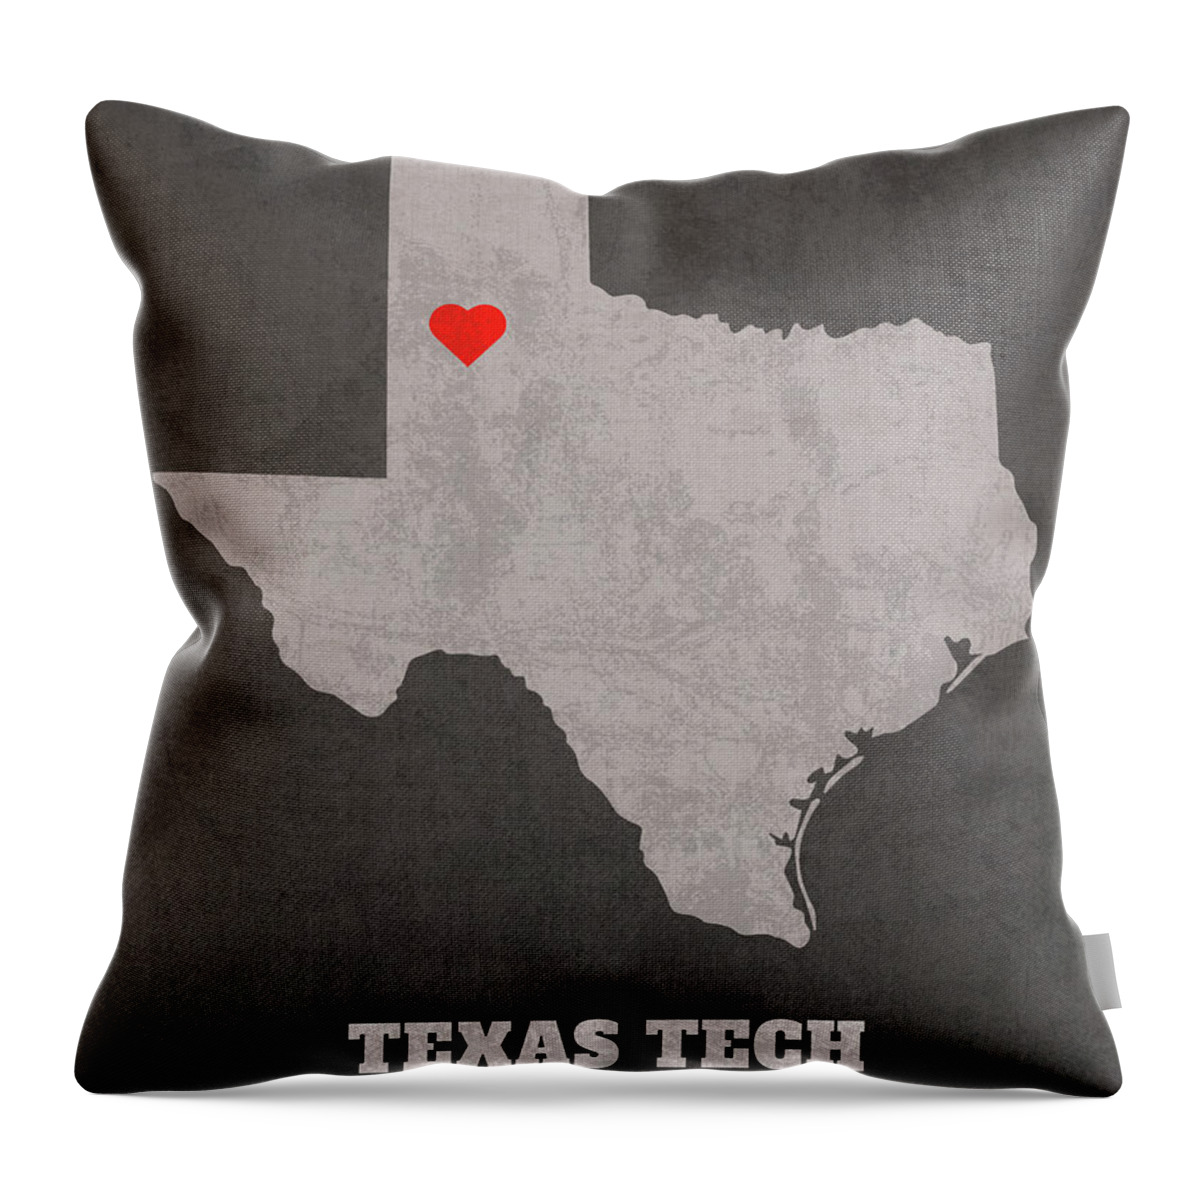 Texas Tech University Throw Pillow featuring the mixed media Texas Tech University Lubbock Texas Founded Date Heart Map by Design Turnpike